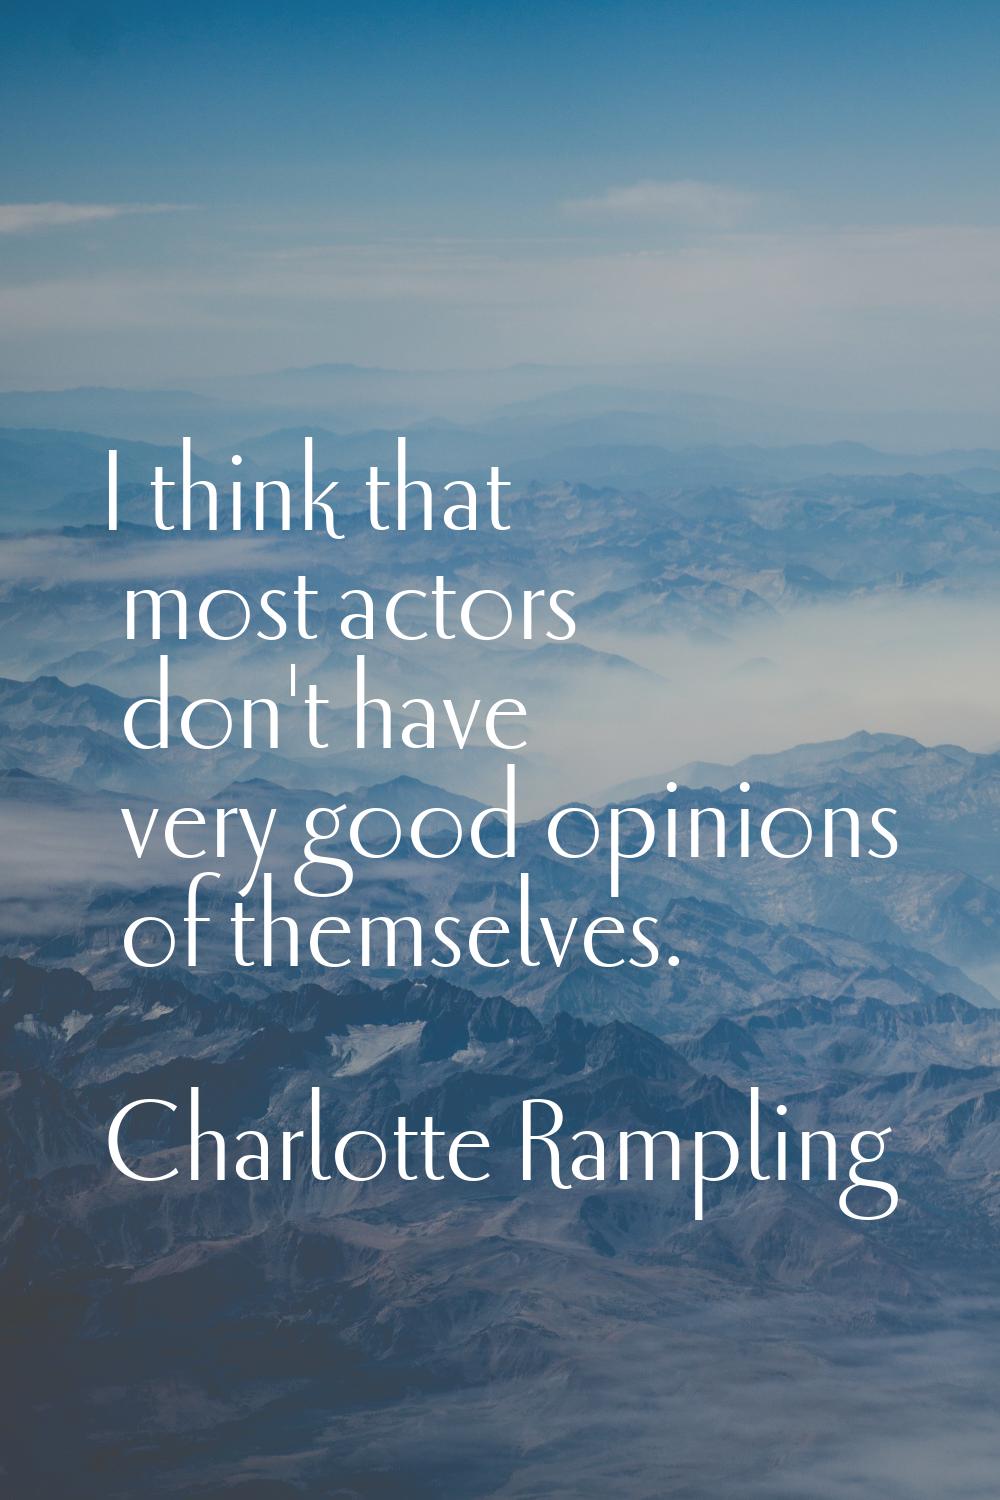 I think that most actors don't have very good opinions of themselves.